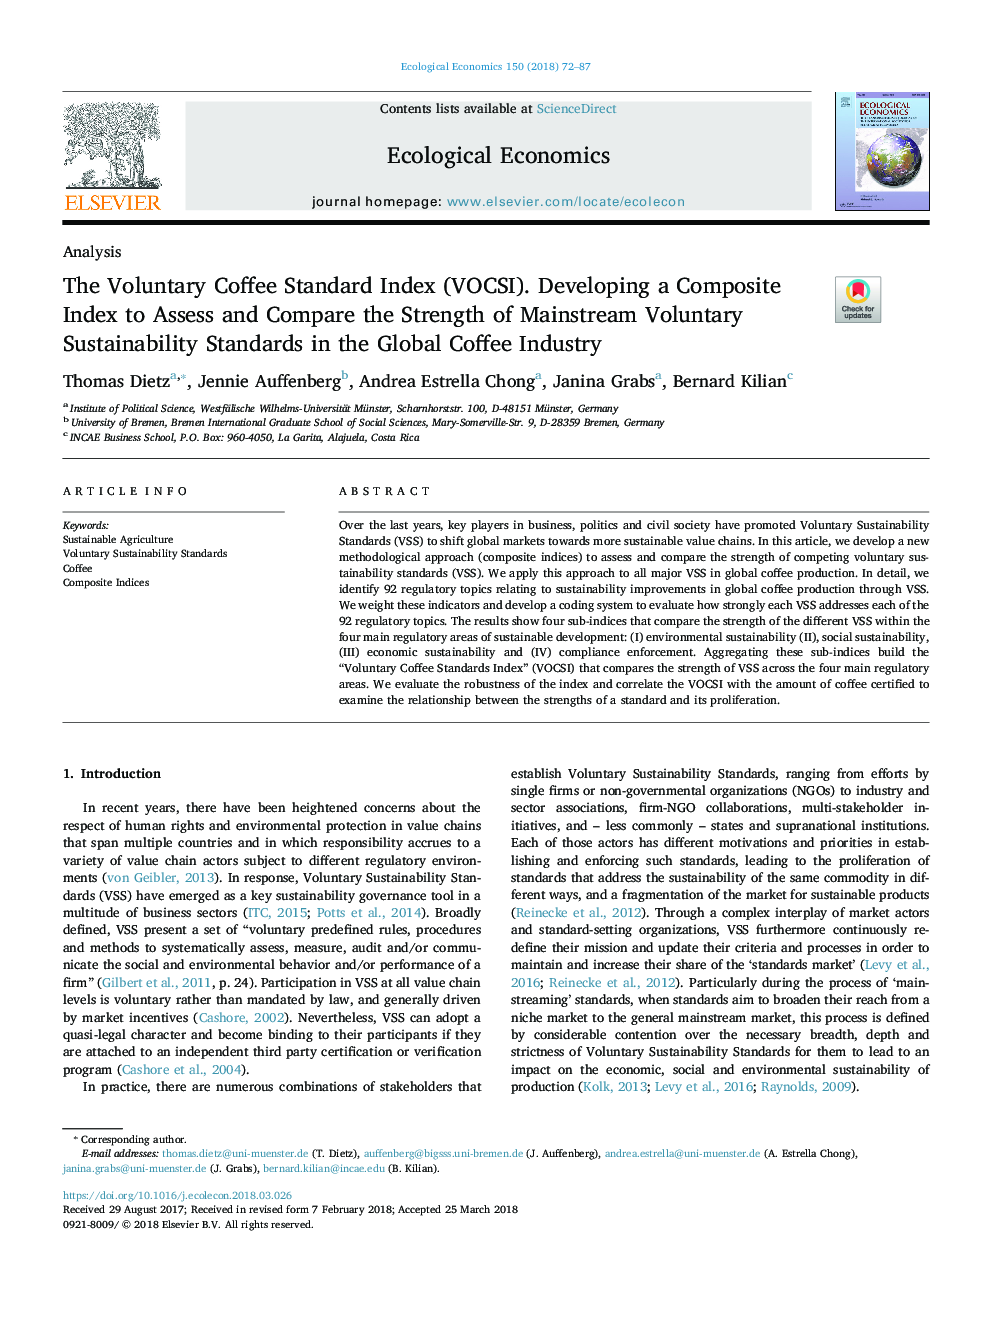 The Voluntary Coffee Standard Index (VOCSI). Developing a Composite Index to Assess and Compare the Strength of Mainstream Voluntary Sustainability Standards in the Global Coffee Industry